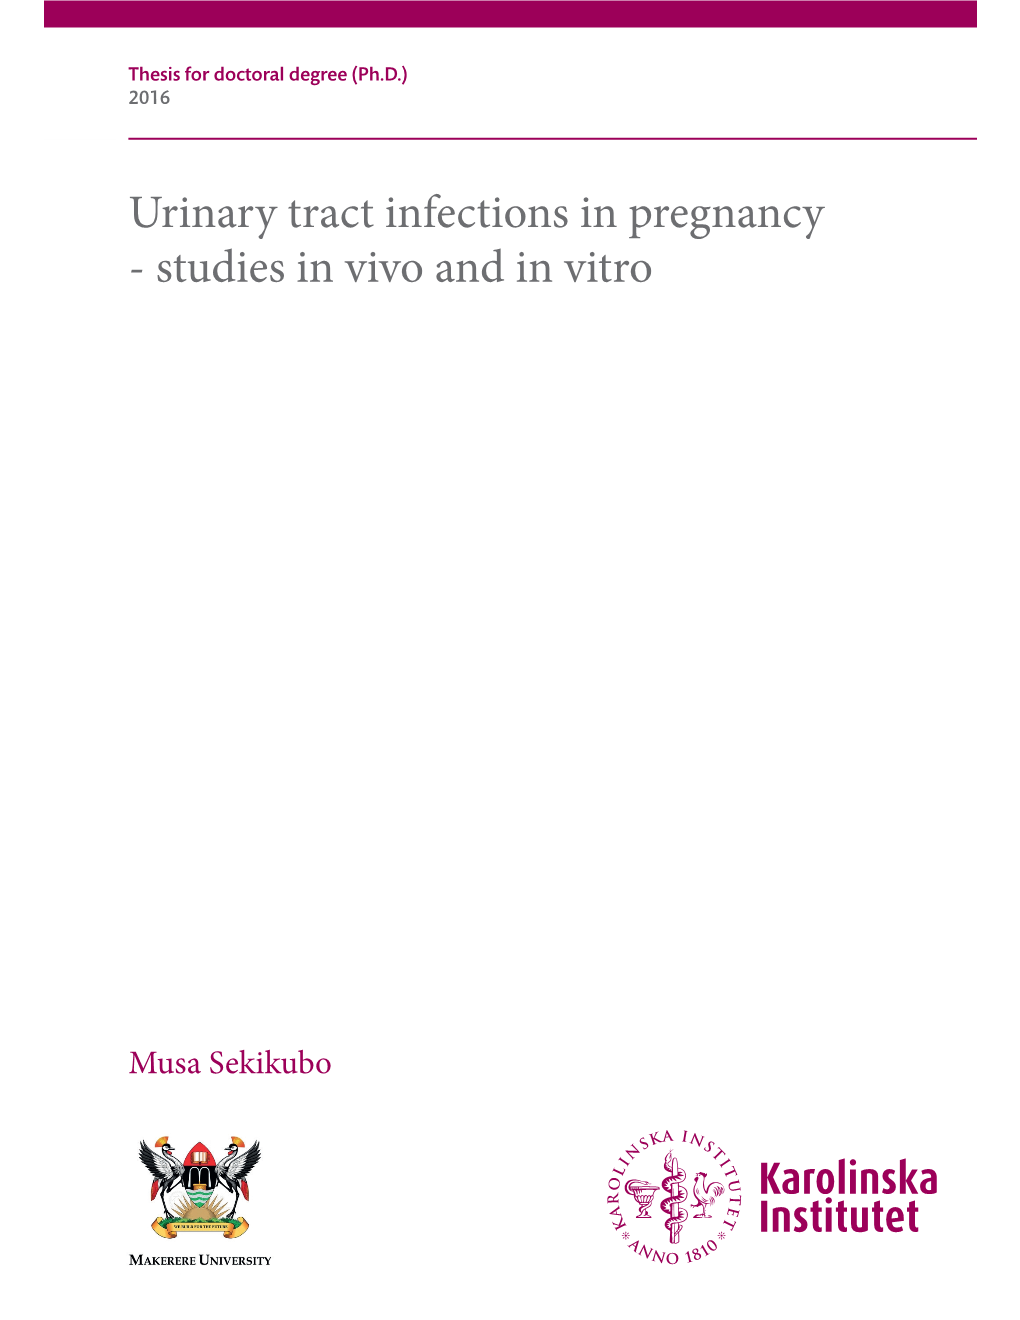 Urinary Tract Infections in Pregnancy - Studies in Vivo and in Vitro Urinary Infections Tract in Pregnancy- Studies in Vivo and in Vitro